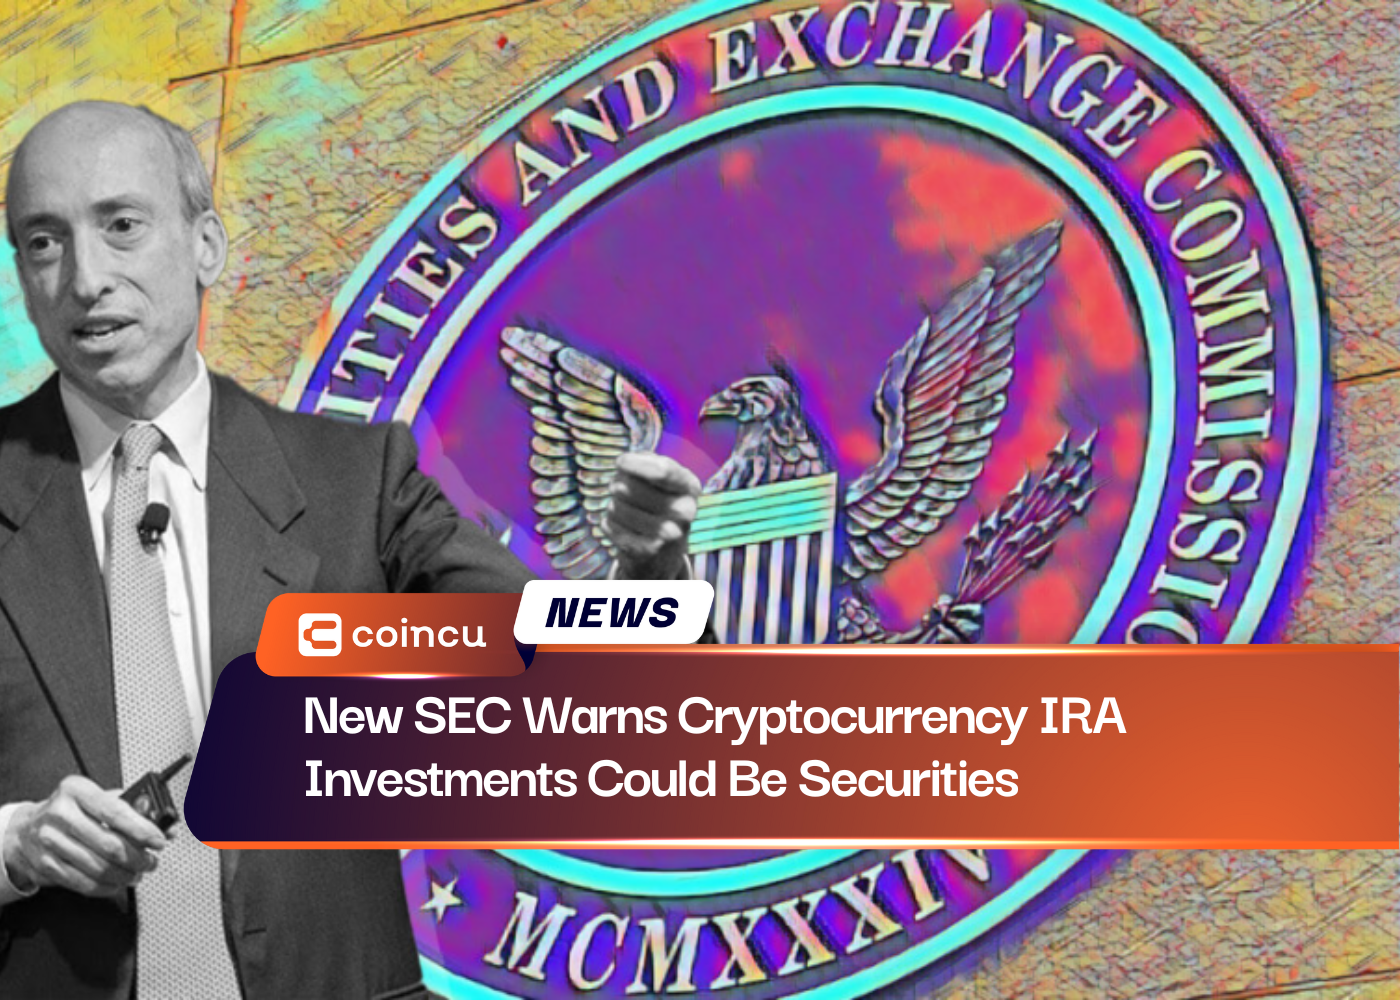 New SEC Warns Cryptocurrency IRA Investments Could Be Securities